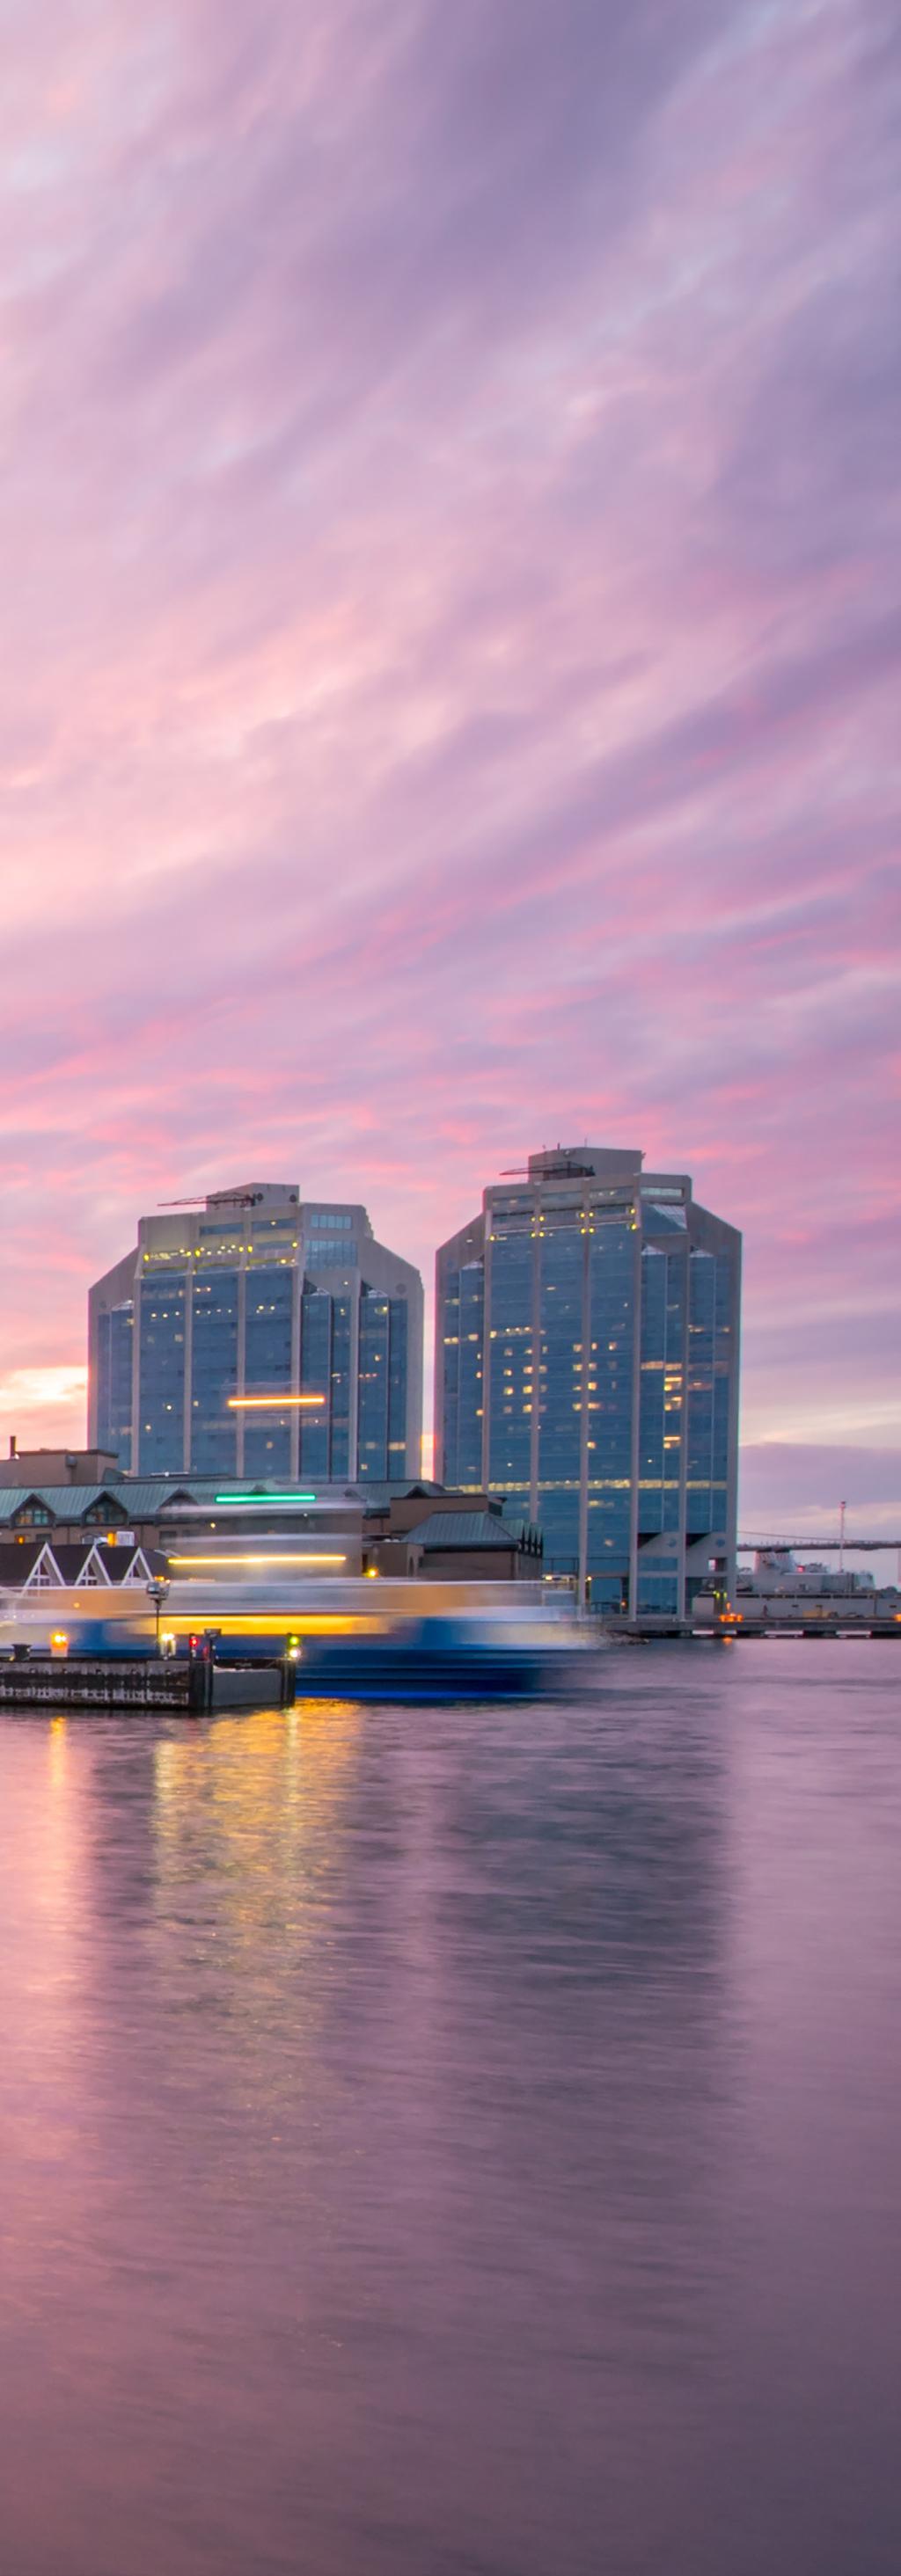 VISION GLOBALLY RECOGNIZED AS CANADA S FAVOURITE CITY There is something special about Halifax that invites you in and leaves you wanting more.